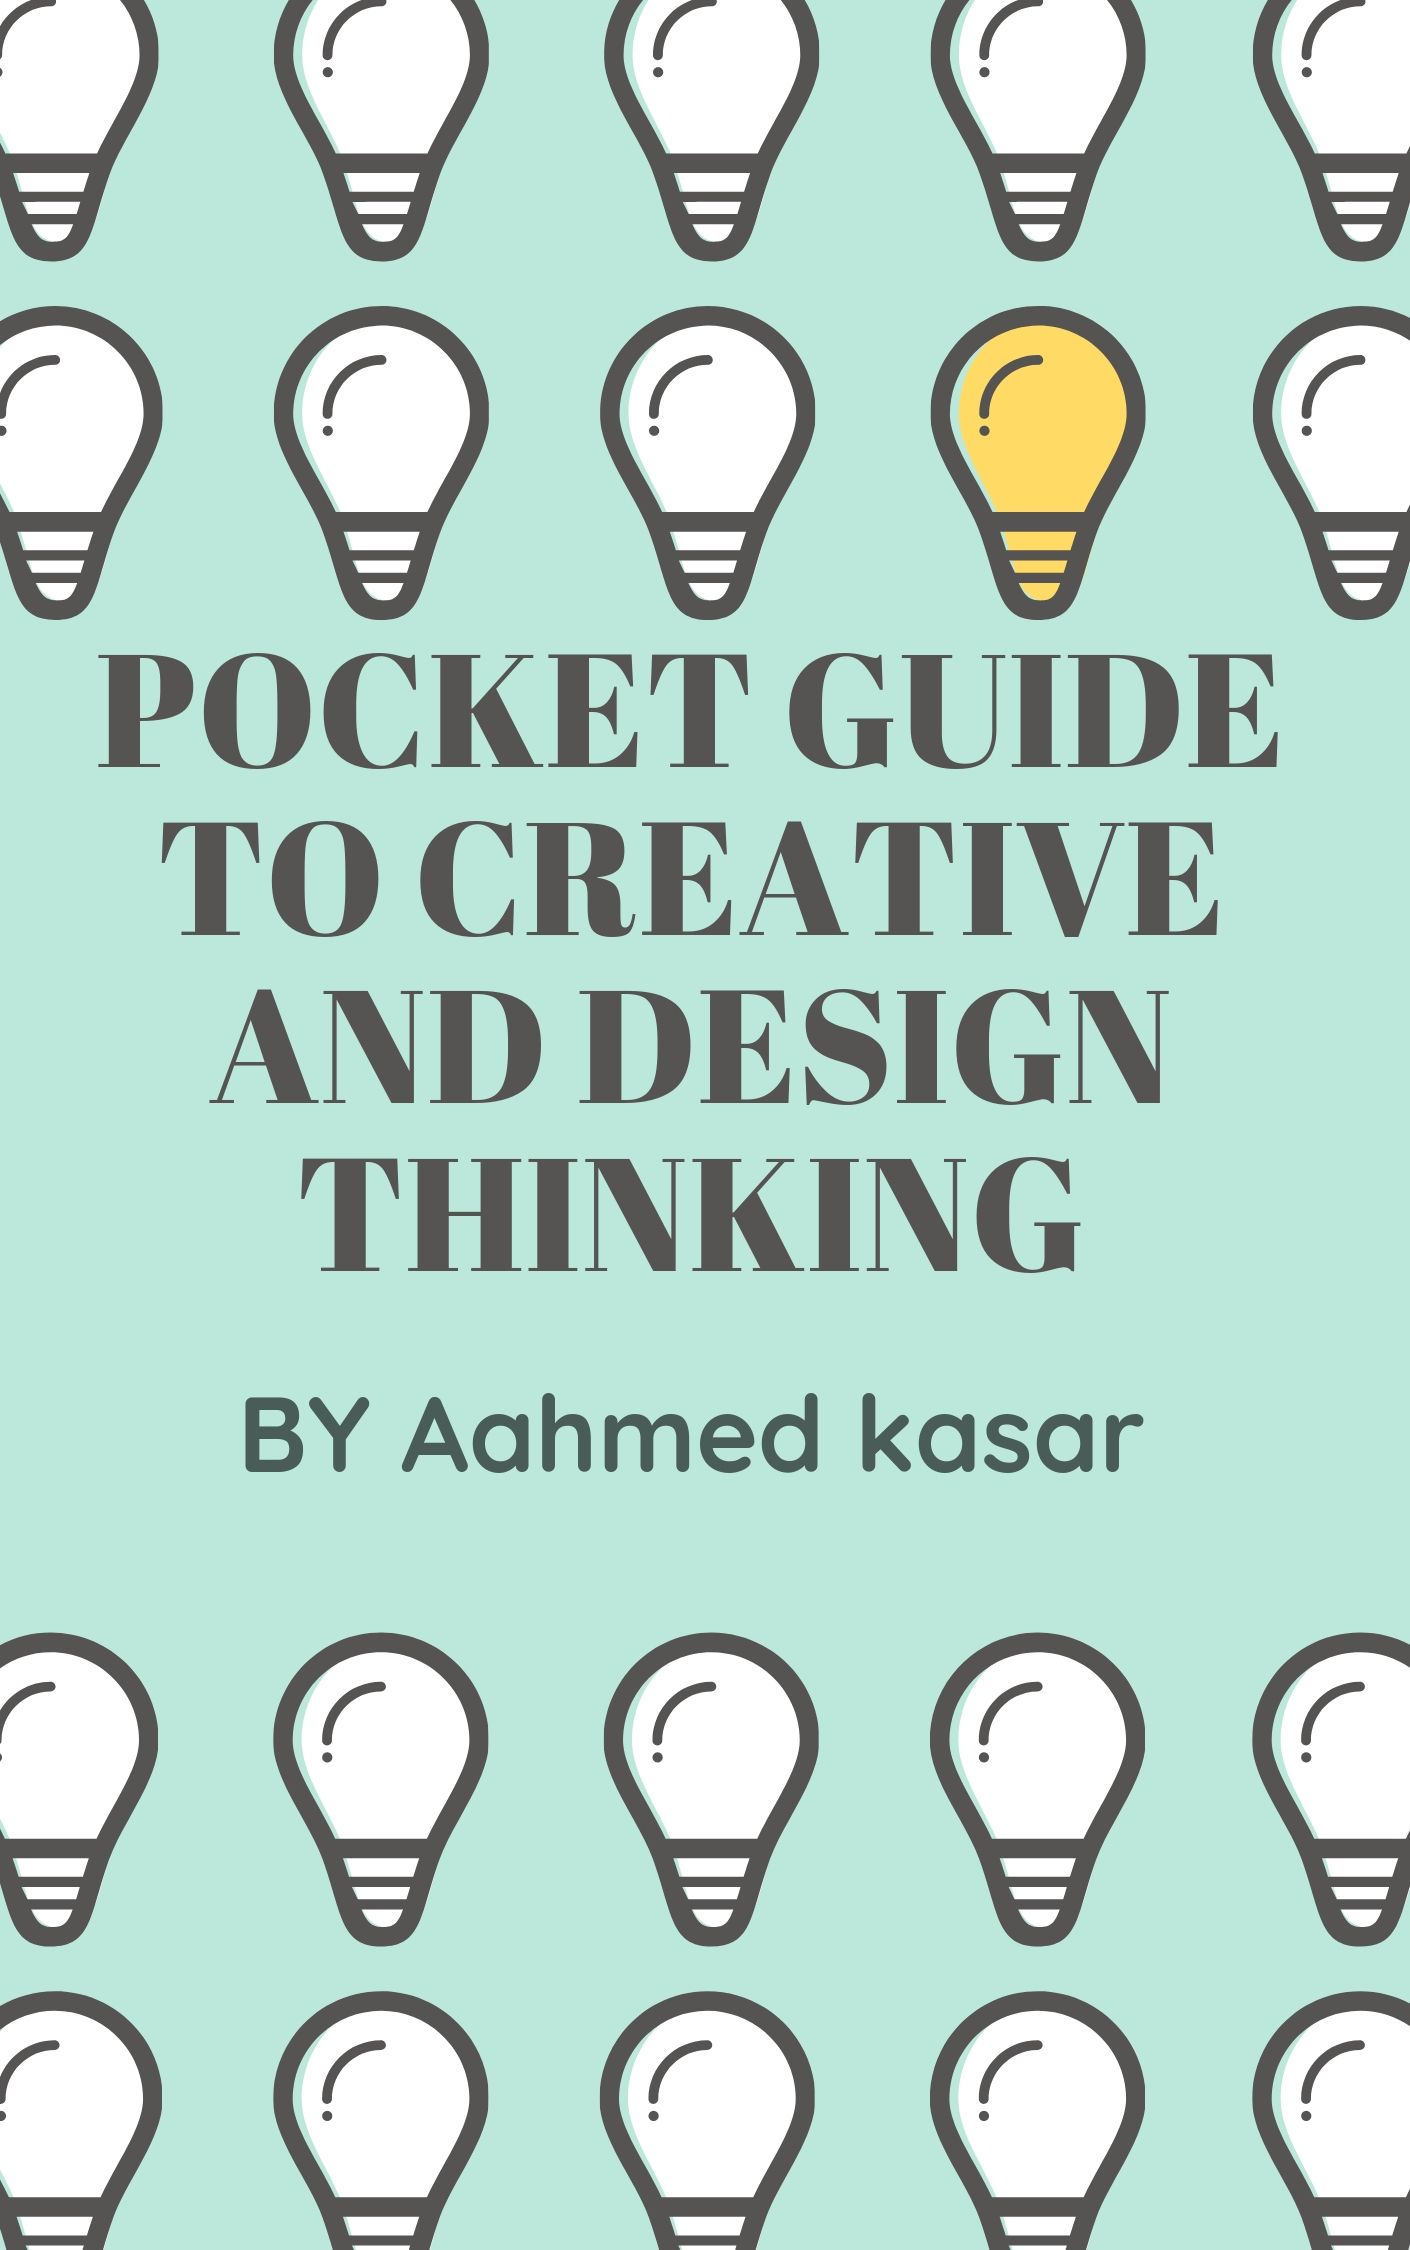 FREE: Pocket guide to creative and design thinking by Aahmed Kasar